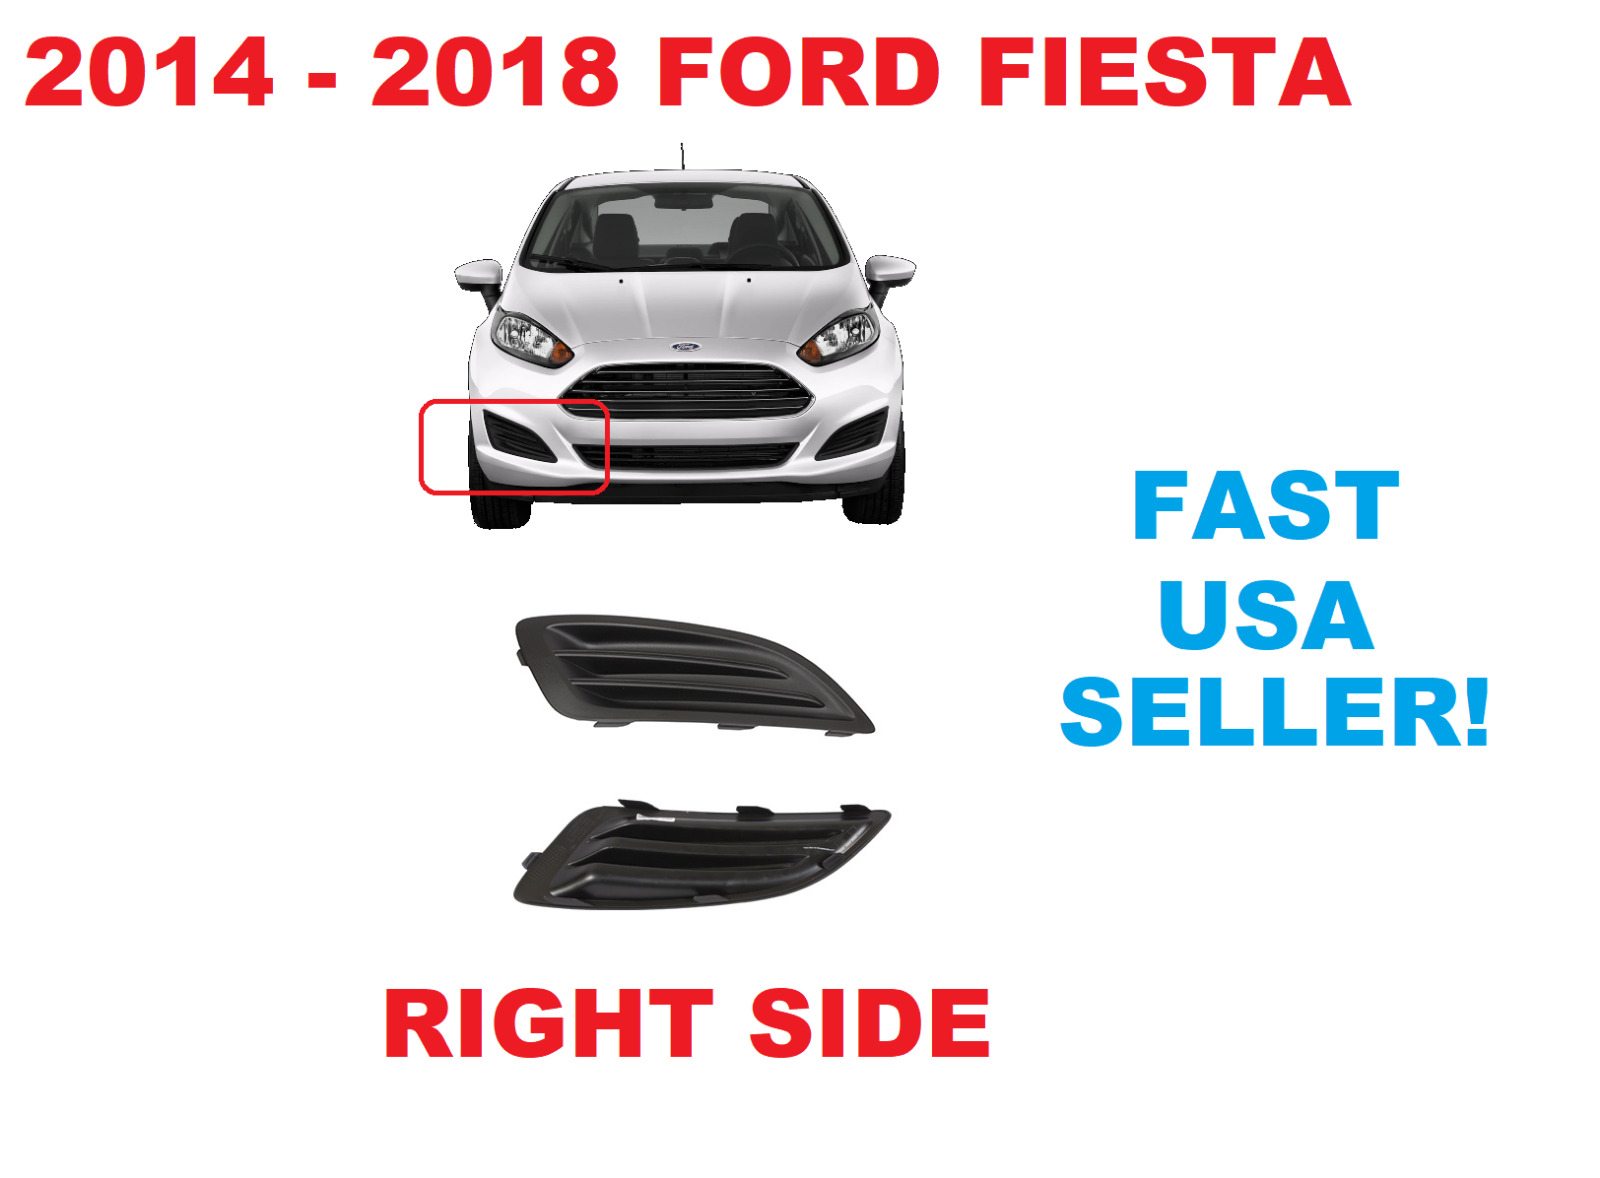 2014 2015 2016 2017 2018 Ford Fiesta FRONT RIGHT FOG LIGHT COVER NEW